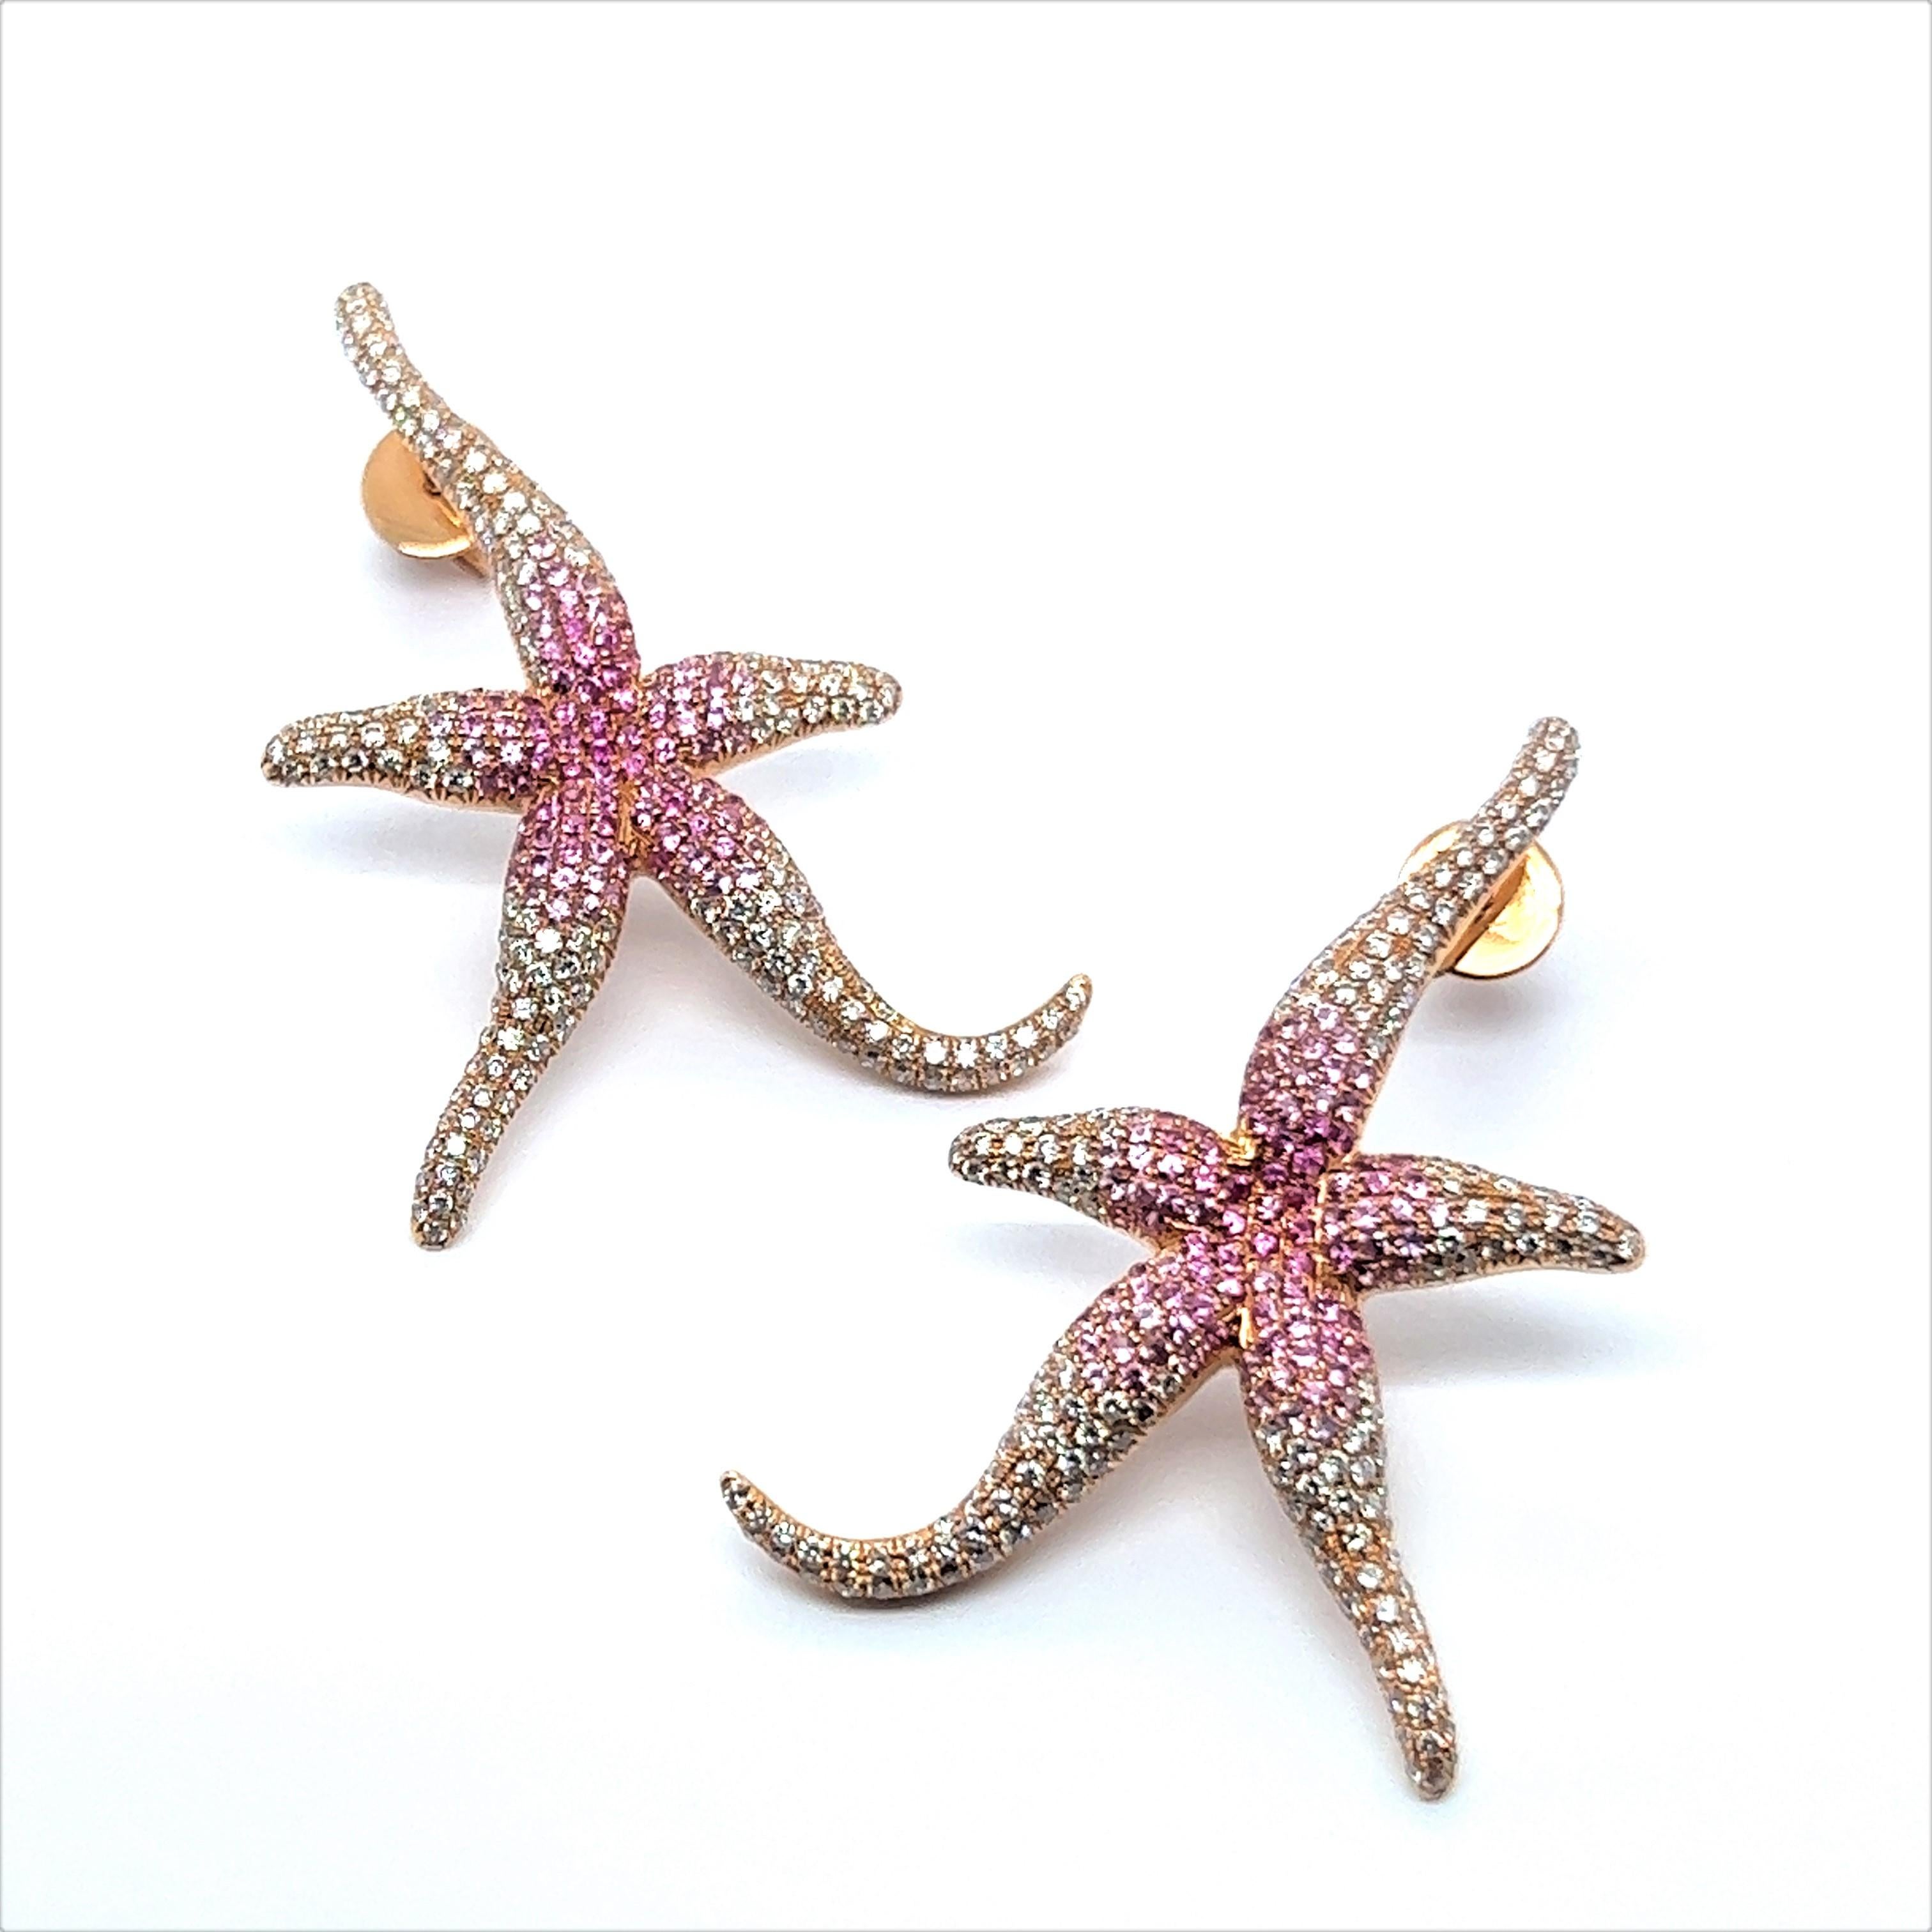 Charming sea star earrings in an alluring combination of pink sapphires and diamonds. Inspired by a marine theme , they capture the essence of the ocean and will add a touch of festive chic to your look.  

Crafted from luxurious 18 Karat rose gold,